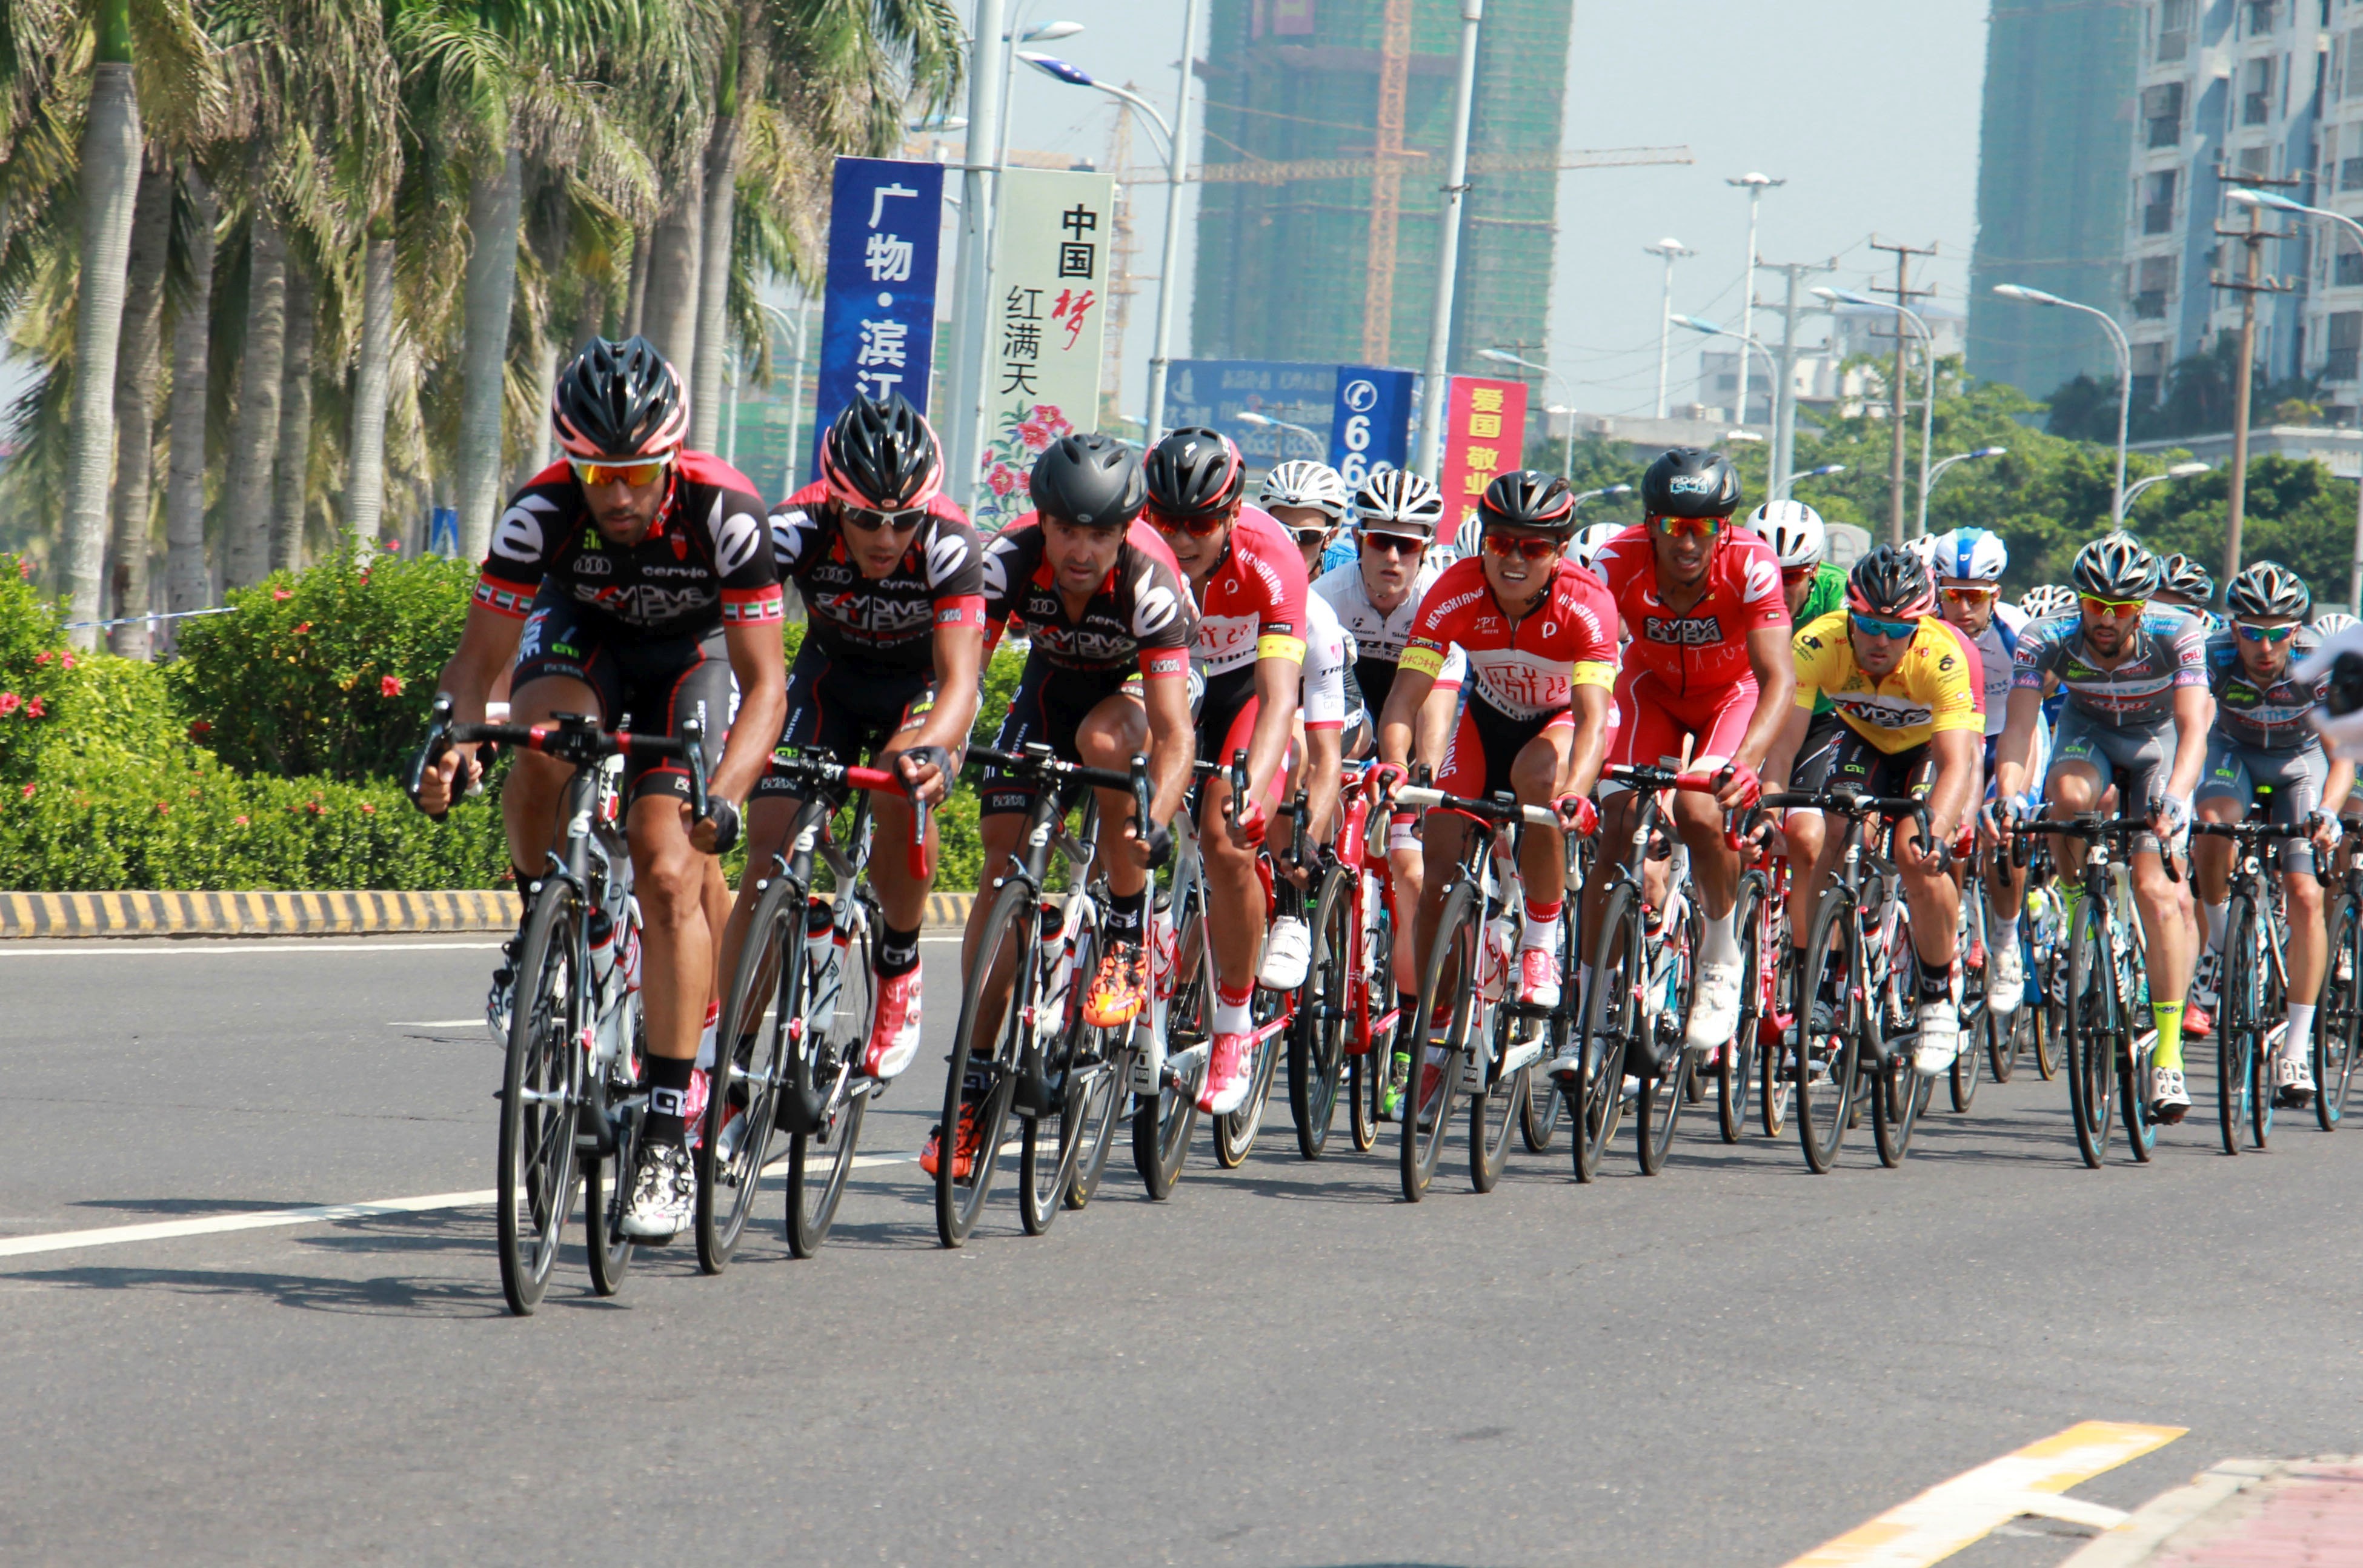 Professional cyclists race for prize money of US$350,000 in the Tour of Hainan in late October.